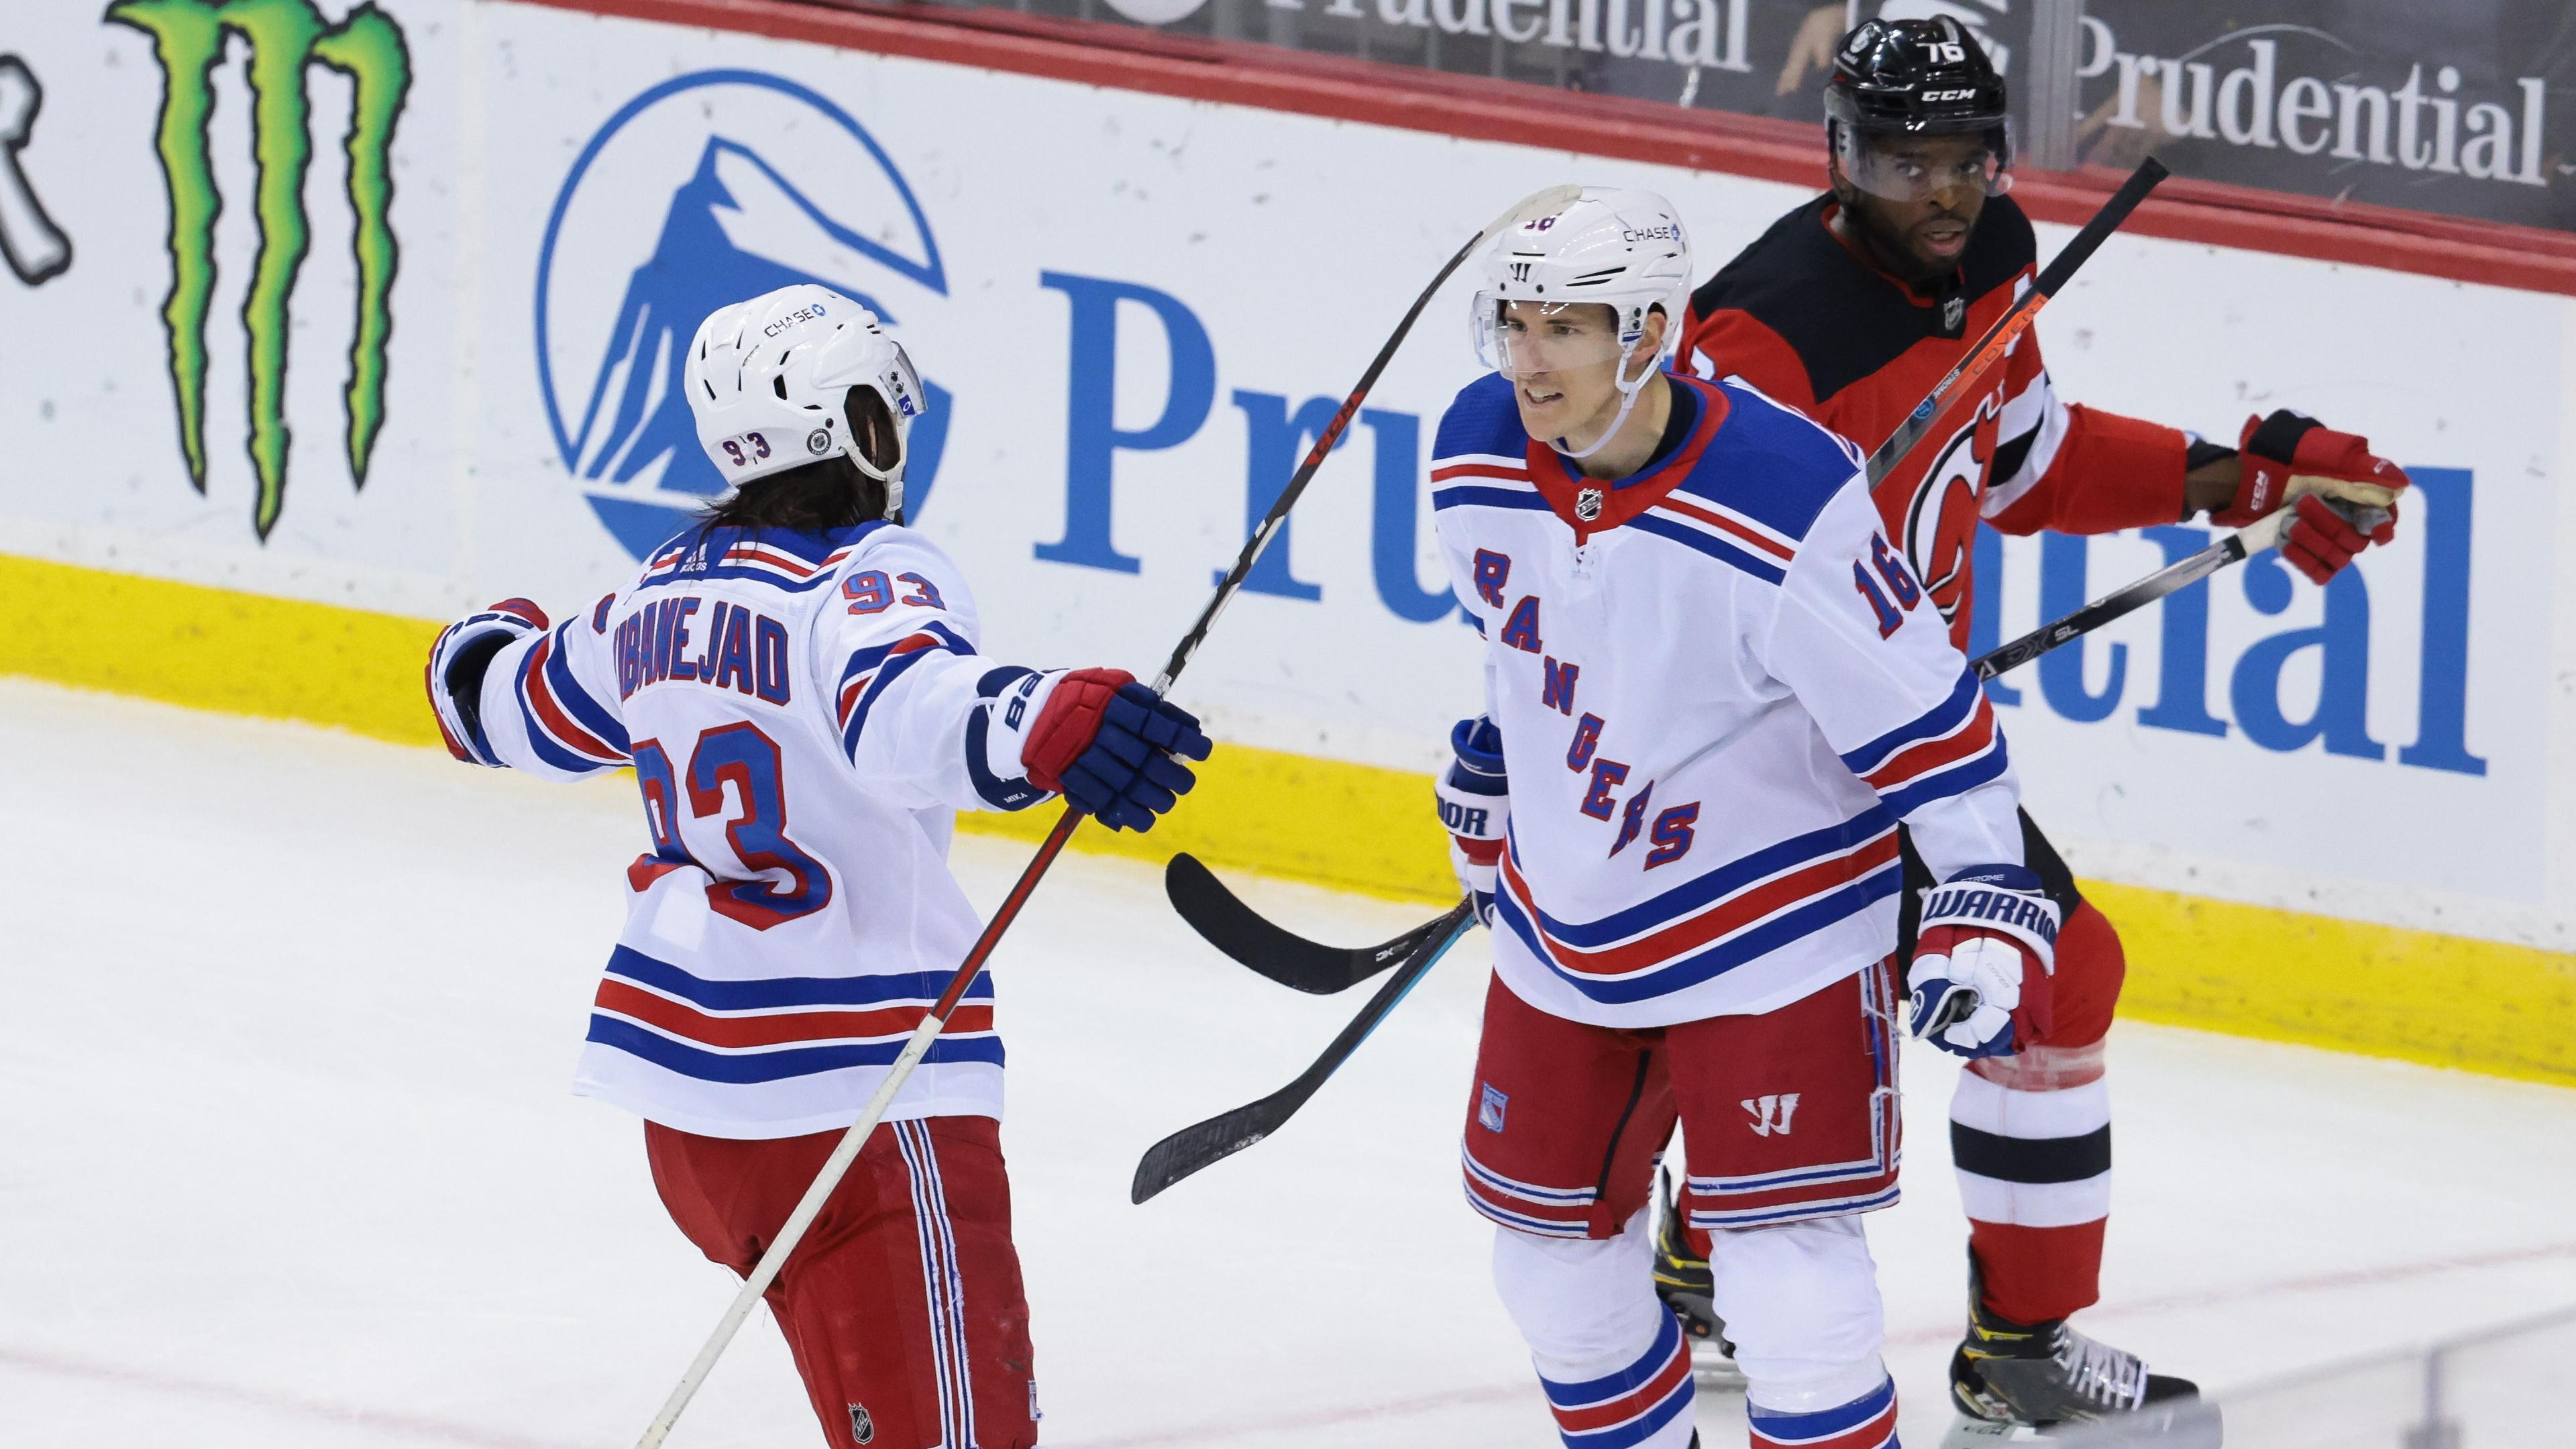 Apr 18, 2021; Newark, New Jersey, USA; New York Rangers center Ryan Strome (16) celebrates his goal with center Mika Zibanejad (93) in front of New Jersey Devils defenseman P.K. Subban (76) during the third period at Prudential Center. / © Vincent Carchietta-USA TODAY Sports